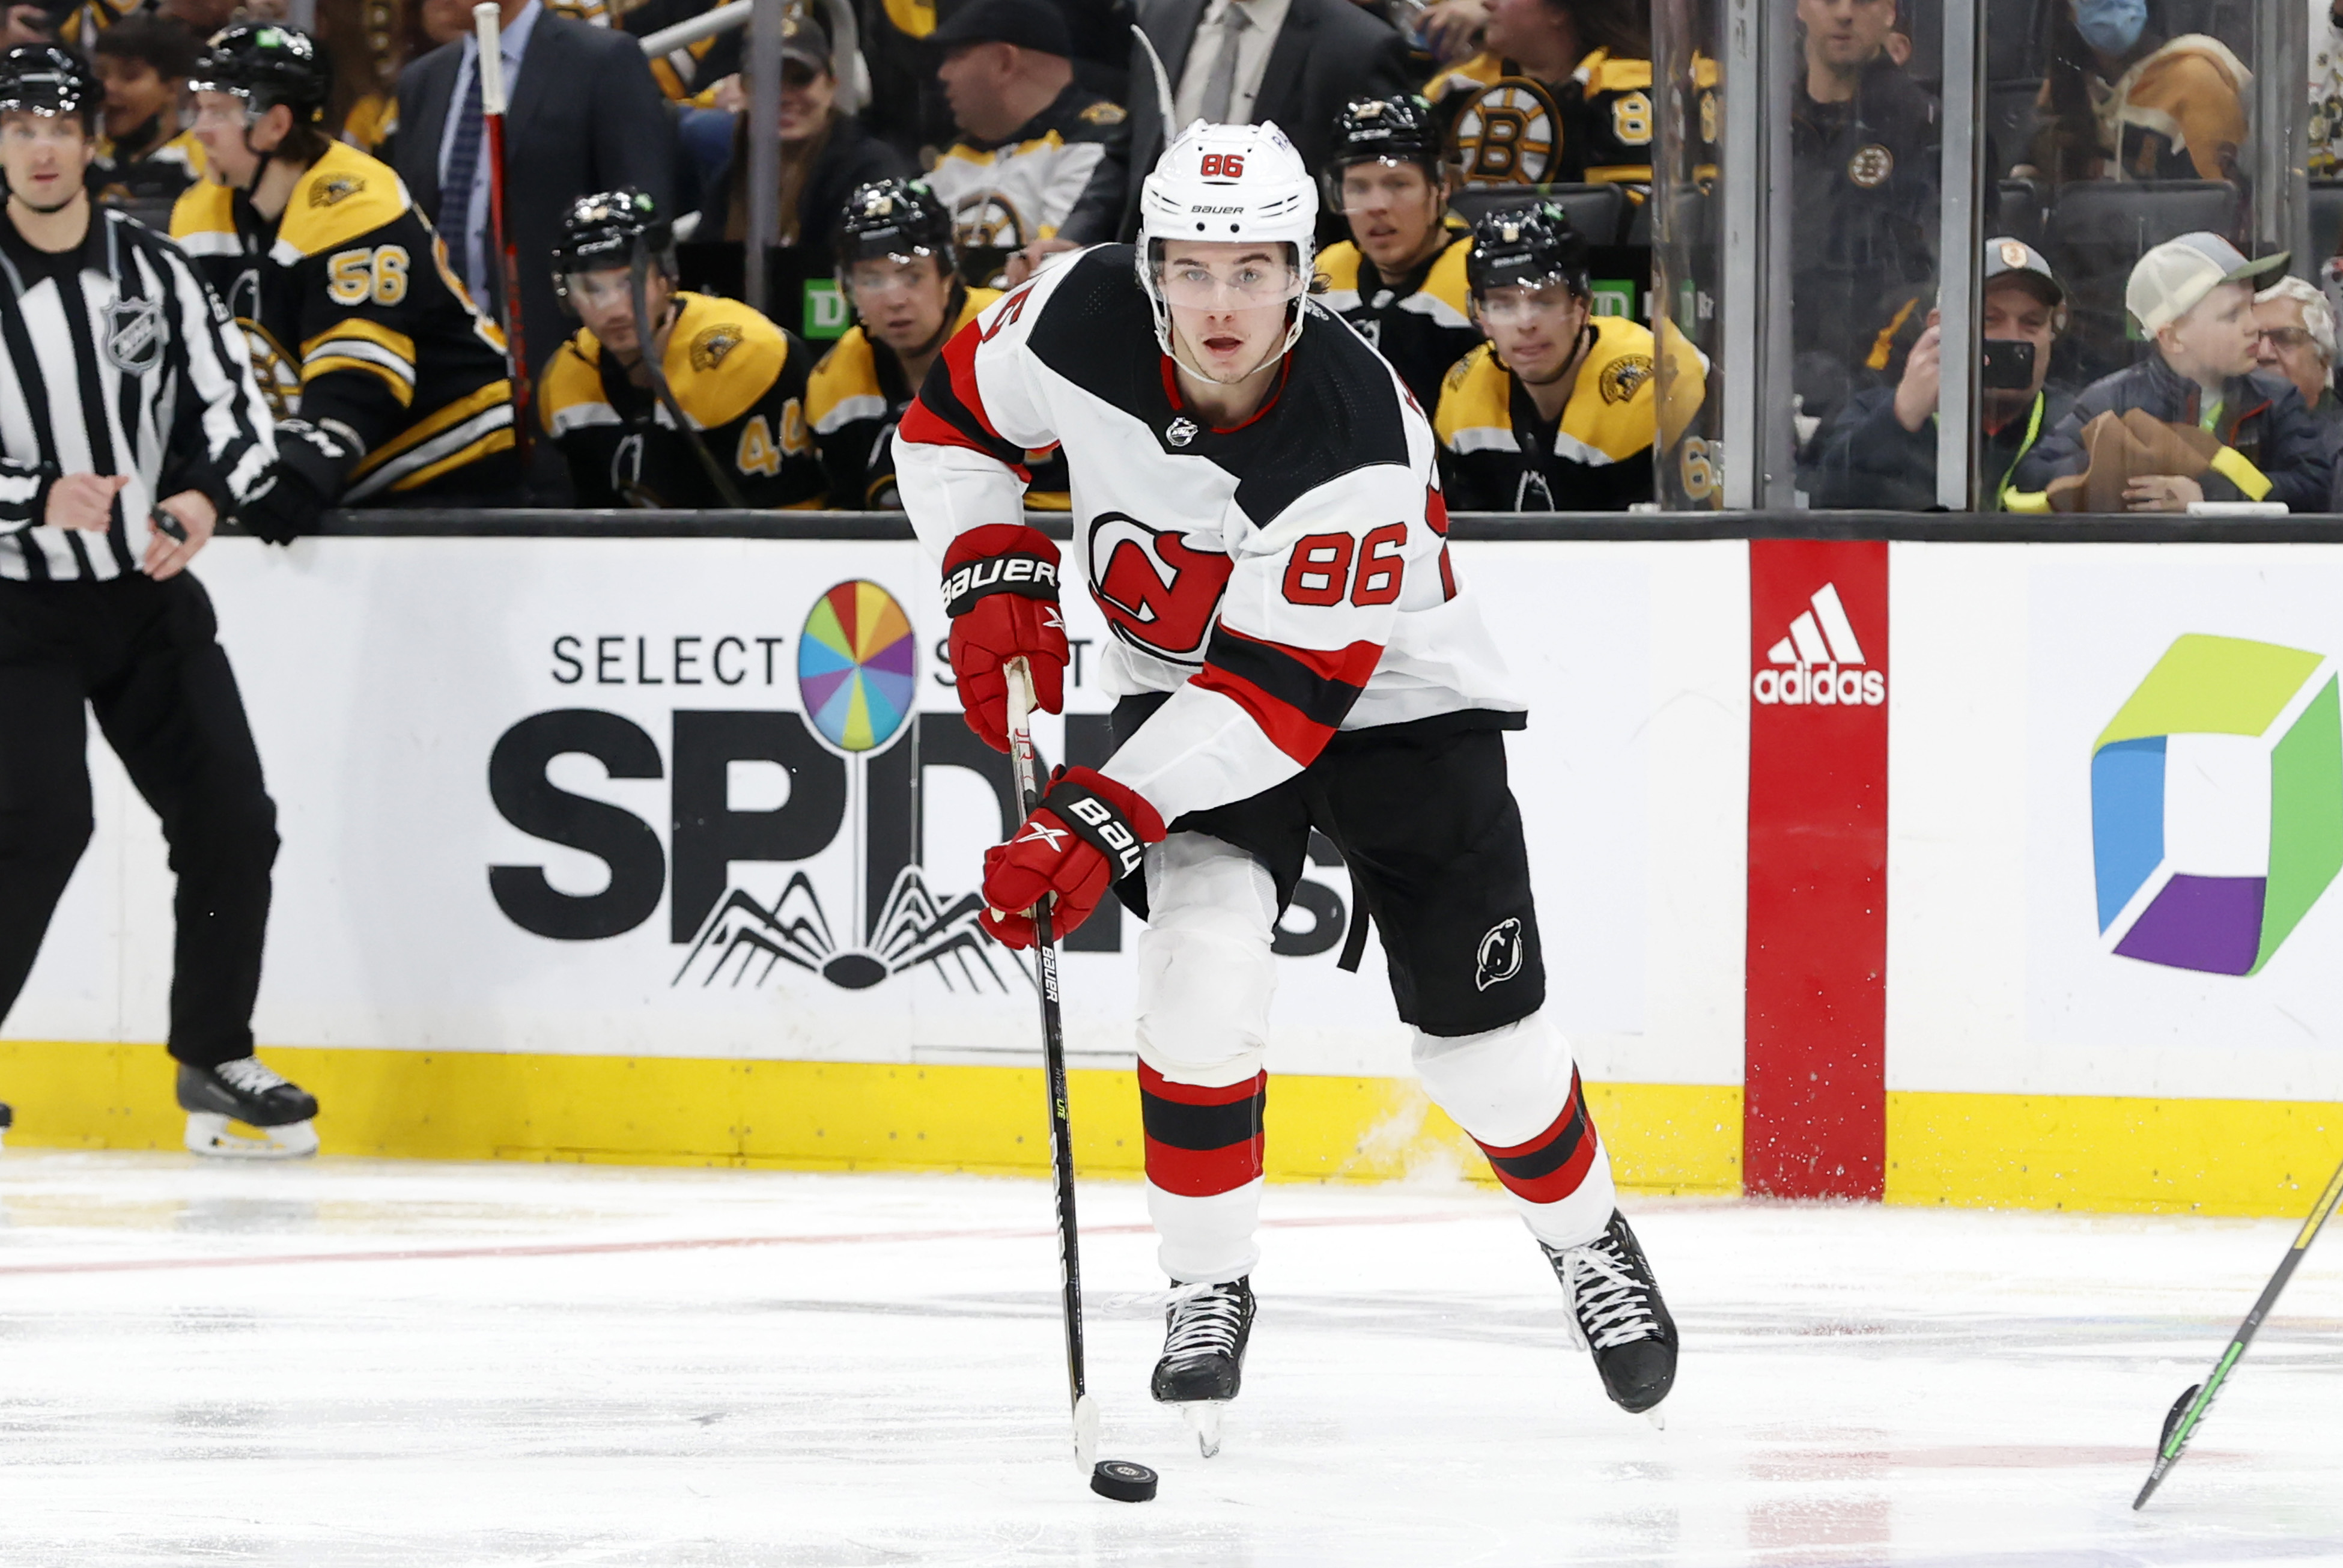 Devils sign Jack Hughes to $64 million contract extension